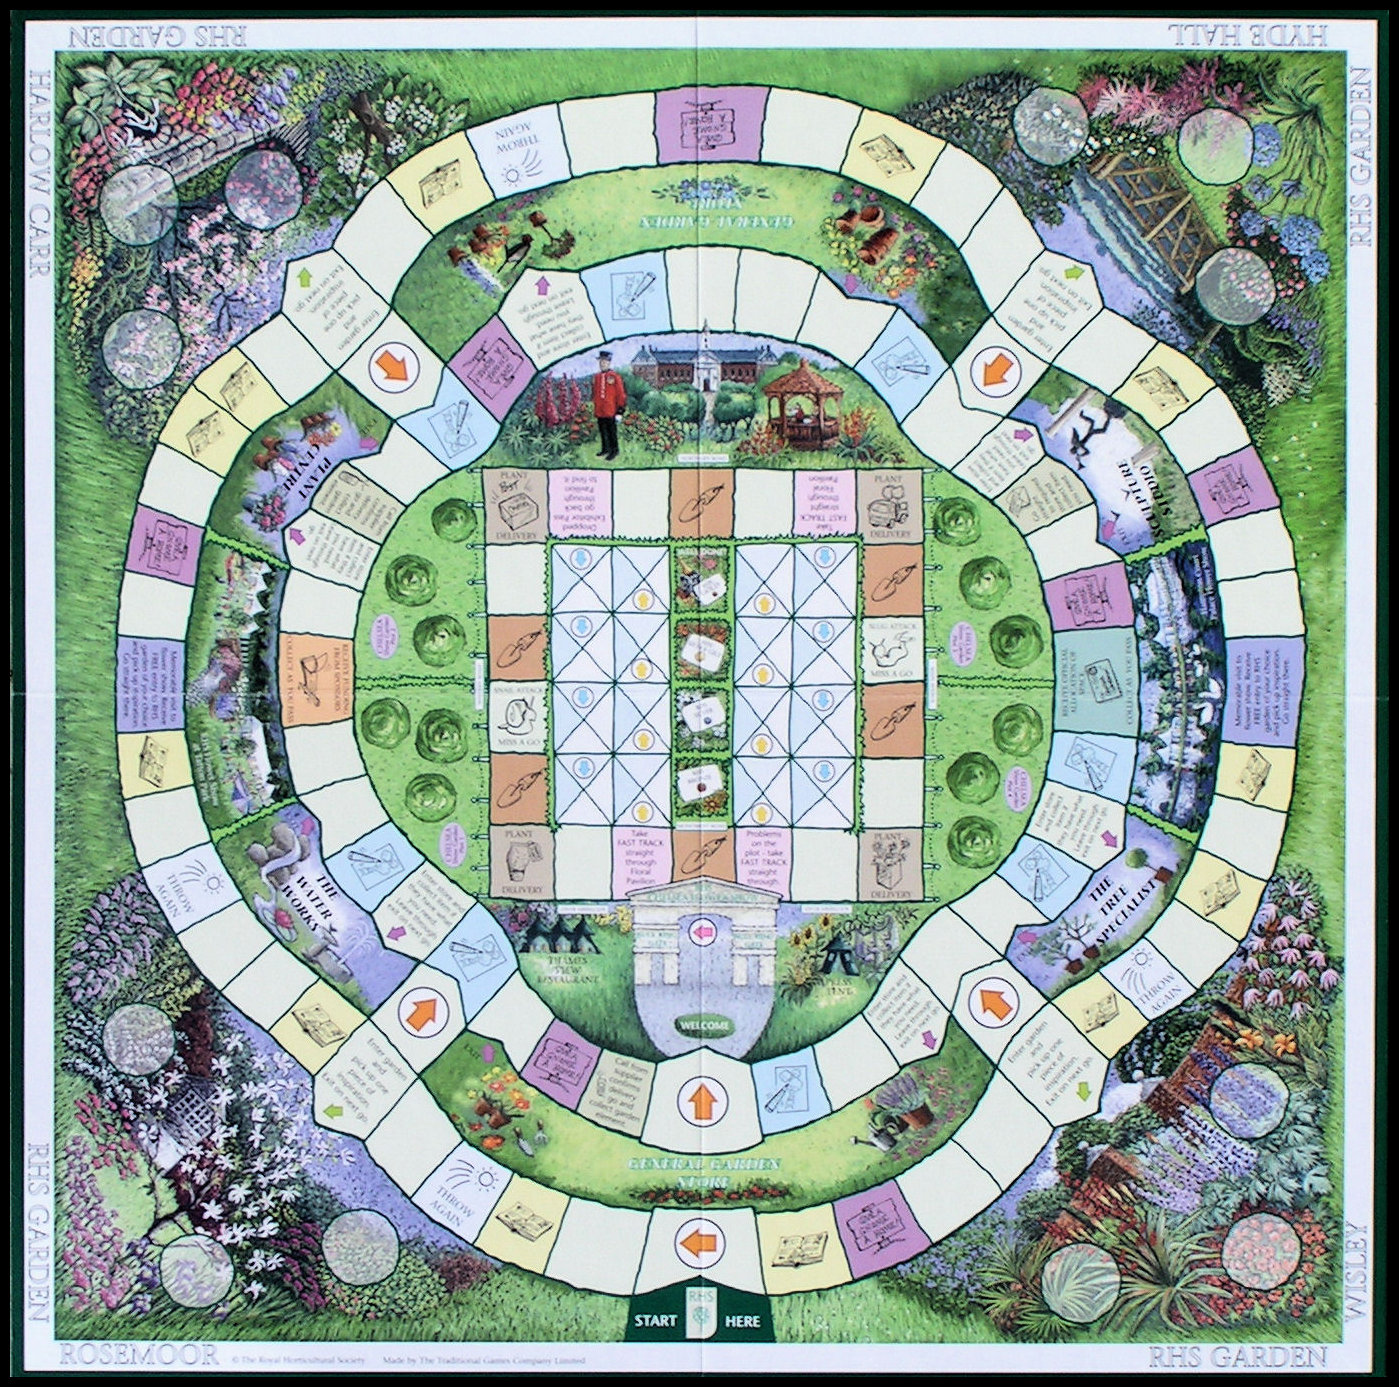 The Chelsea Flower Show Game - Game Board